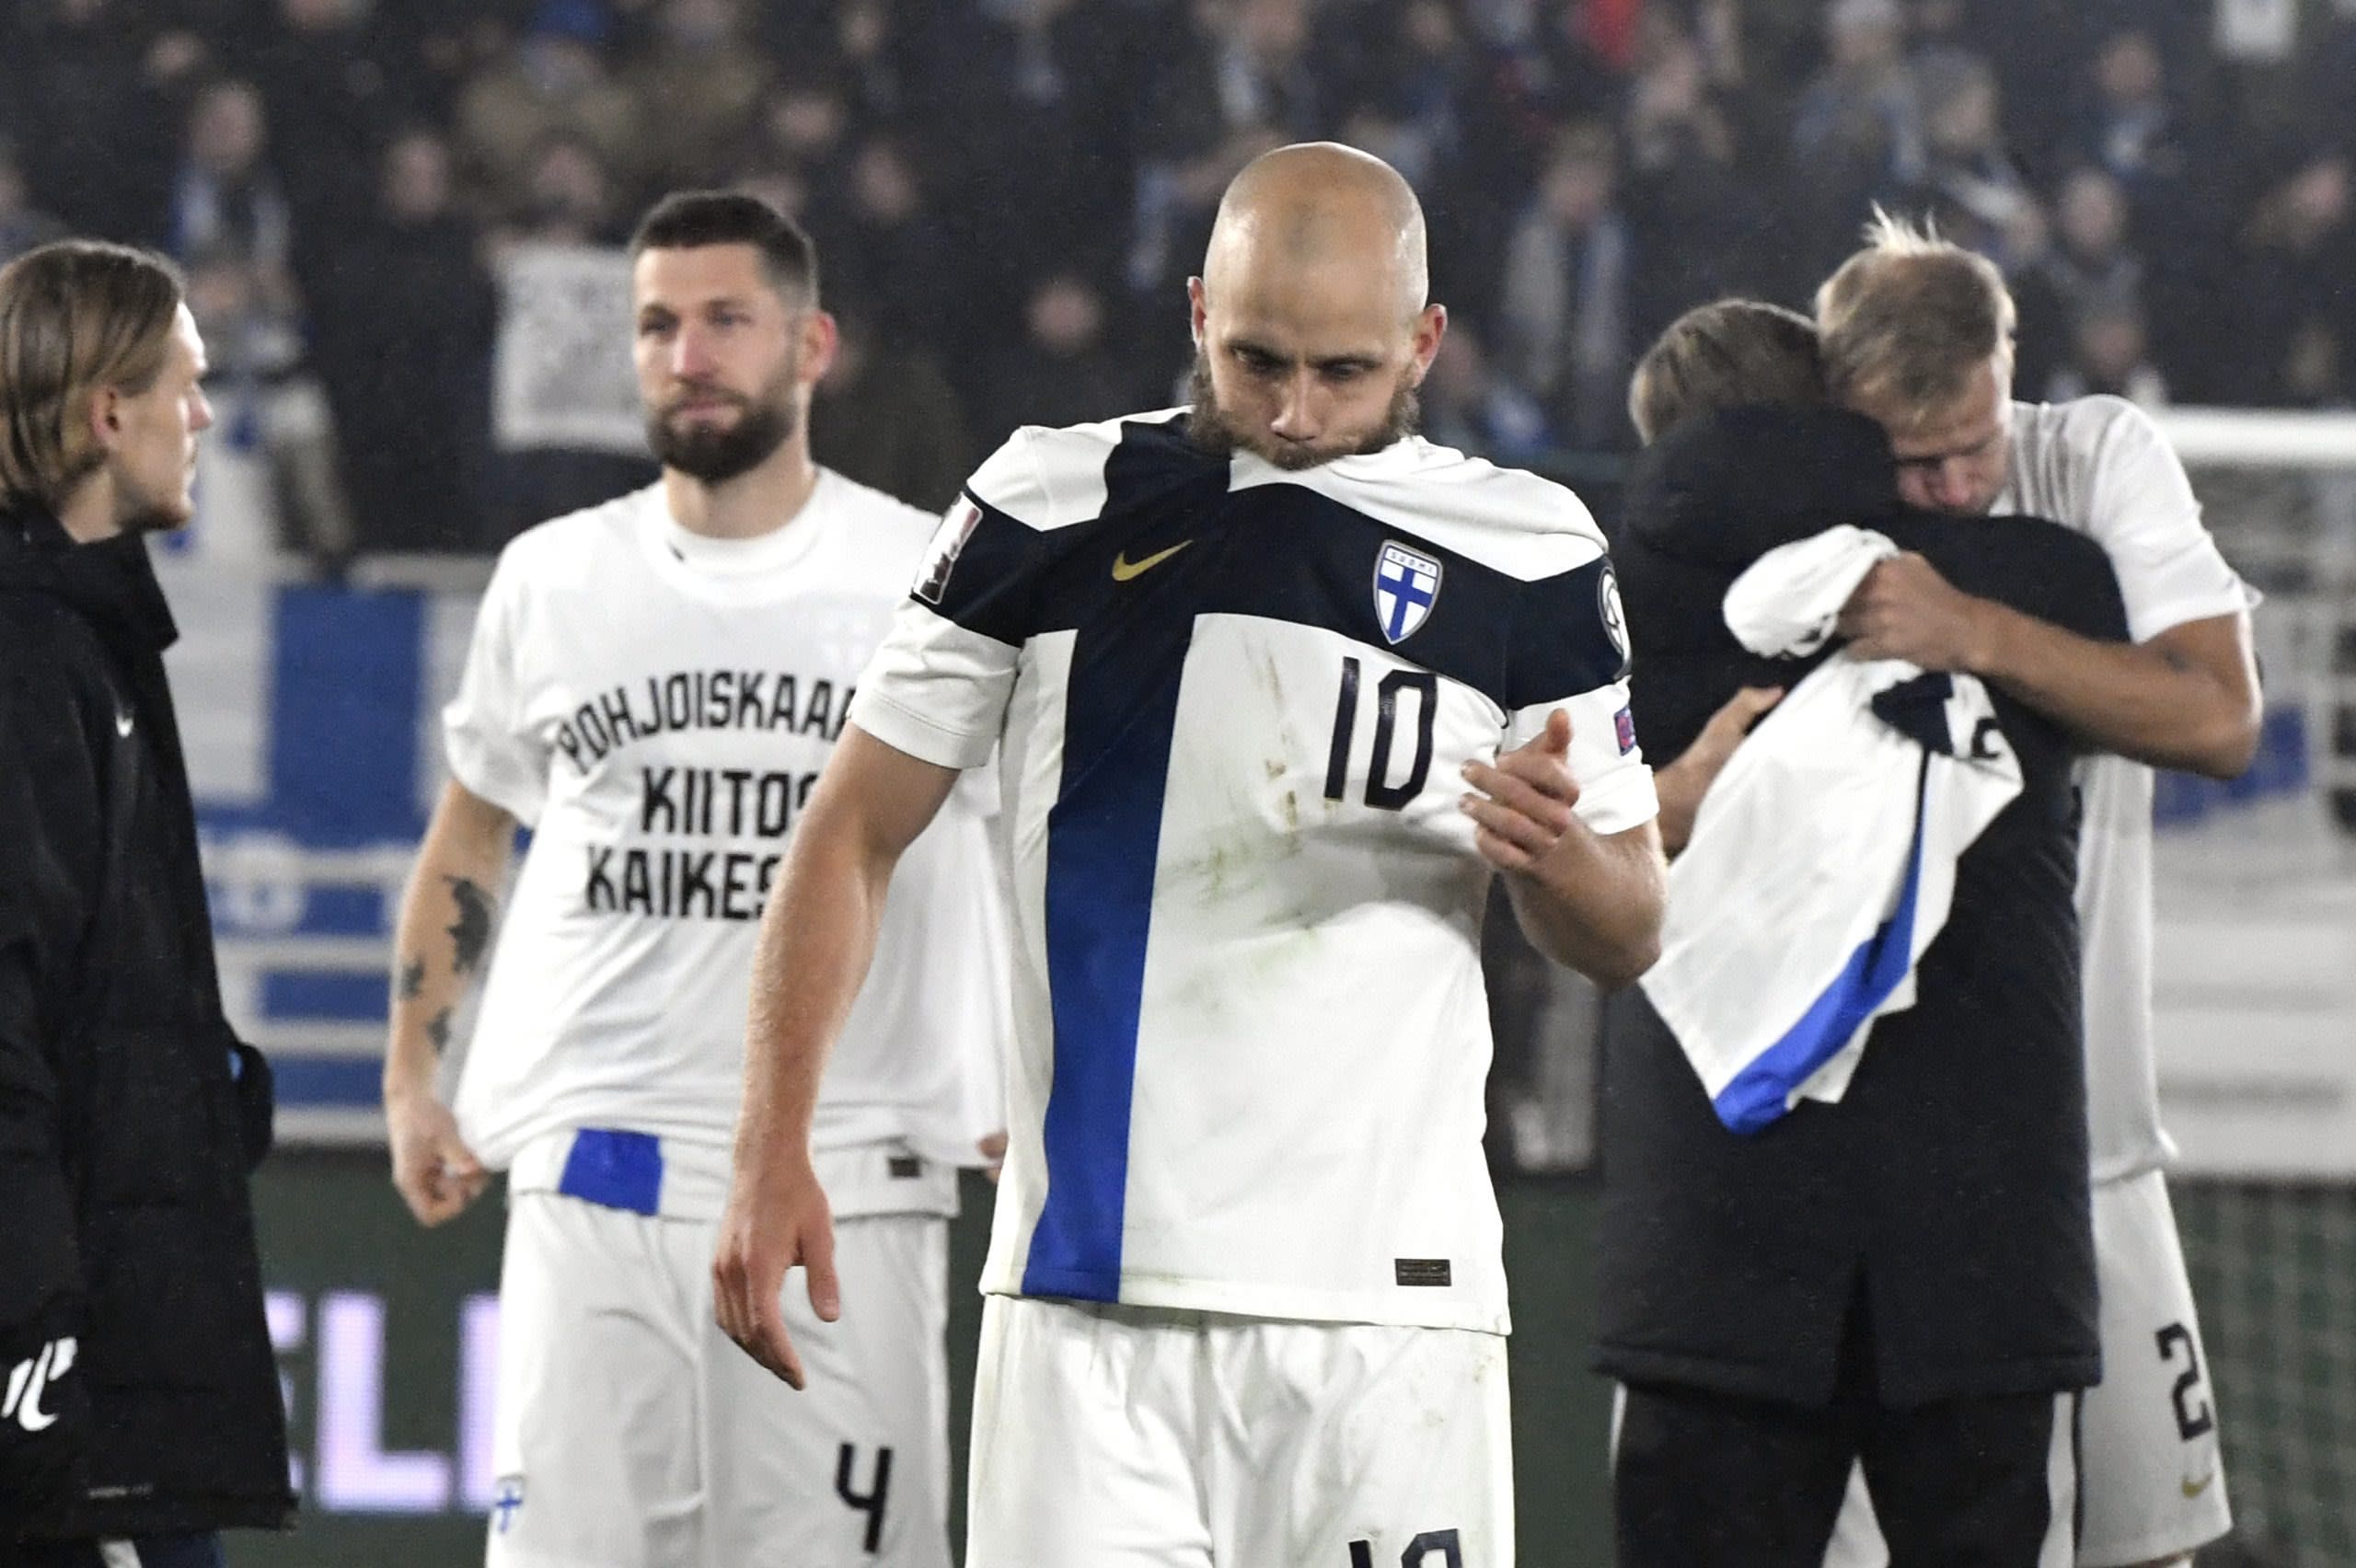 France will end Finland’s World Cup dreams in 2022